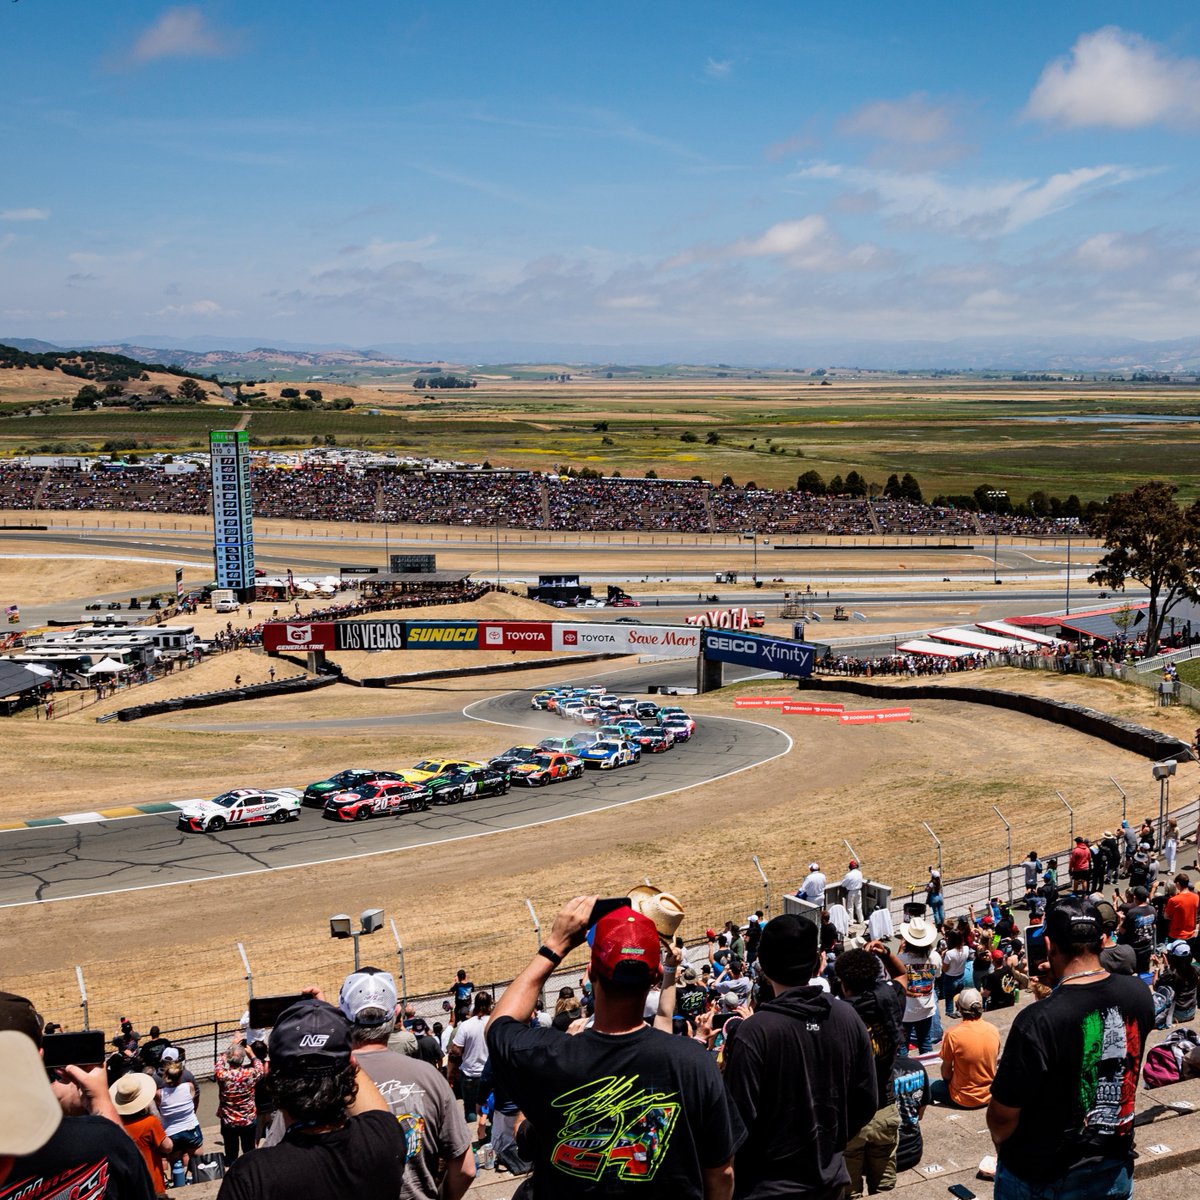 One month until we're racing in Wine Country. #ToyotaSaveMart350 | @NASCAR